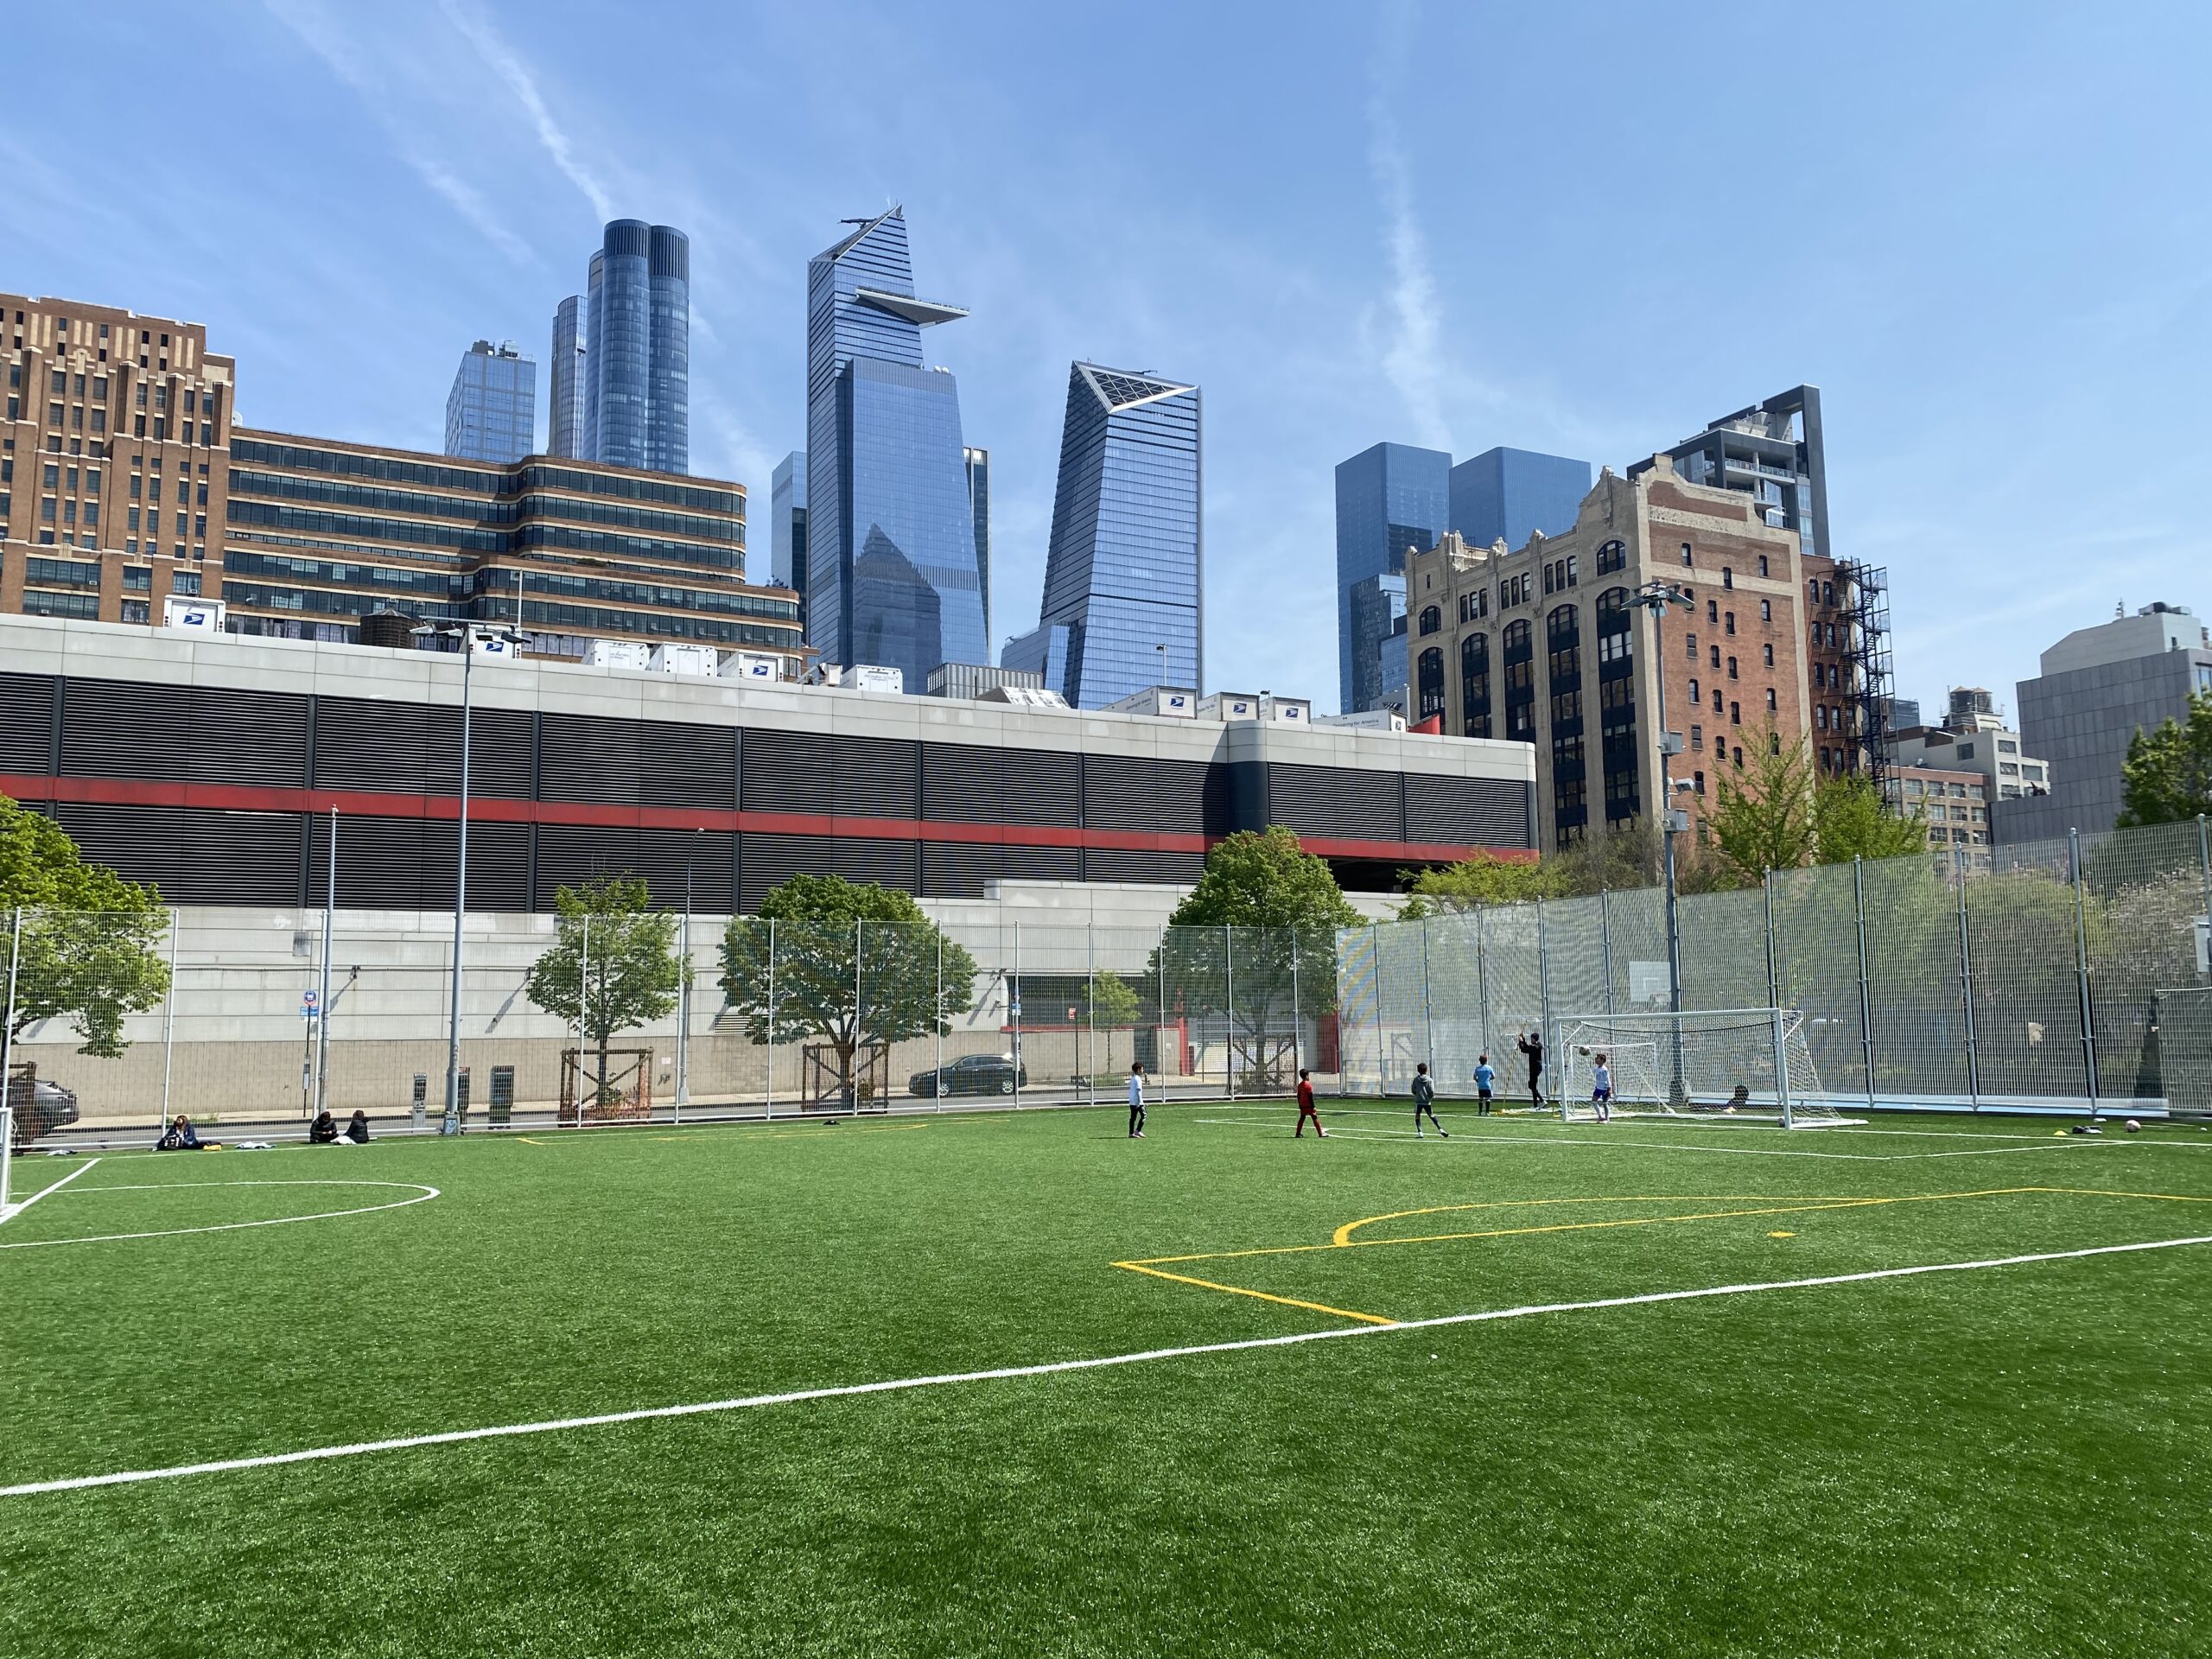 The turf athletic field at Chelsea Waterside Park, with Hudson Yards skyscrapers visible in the distance